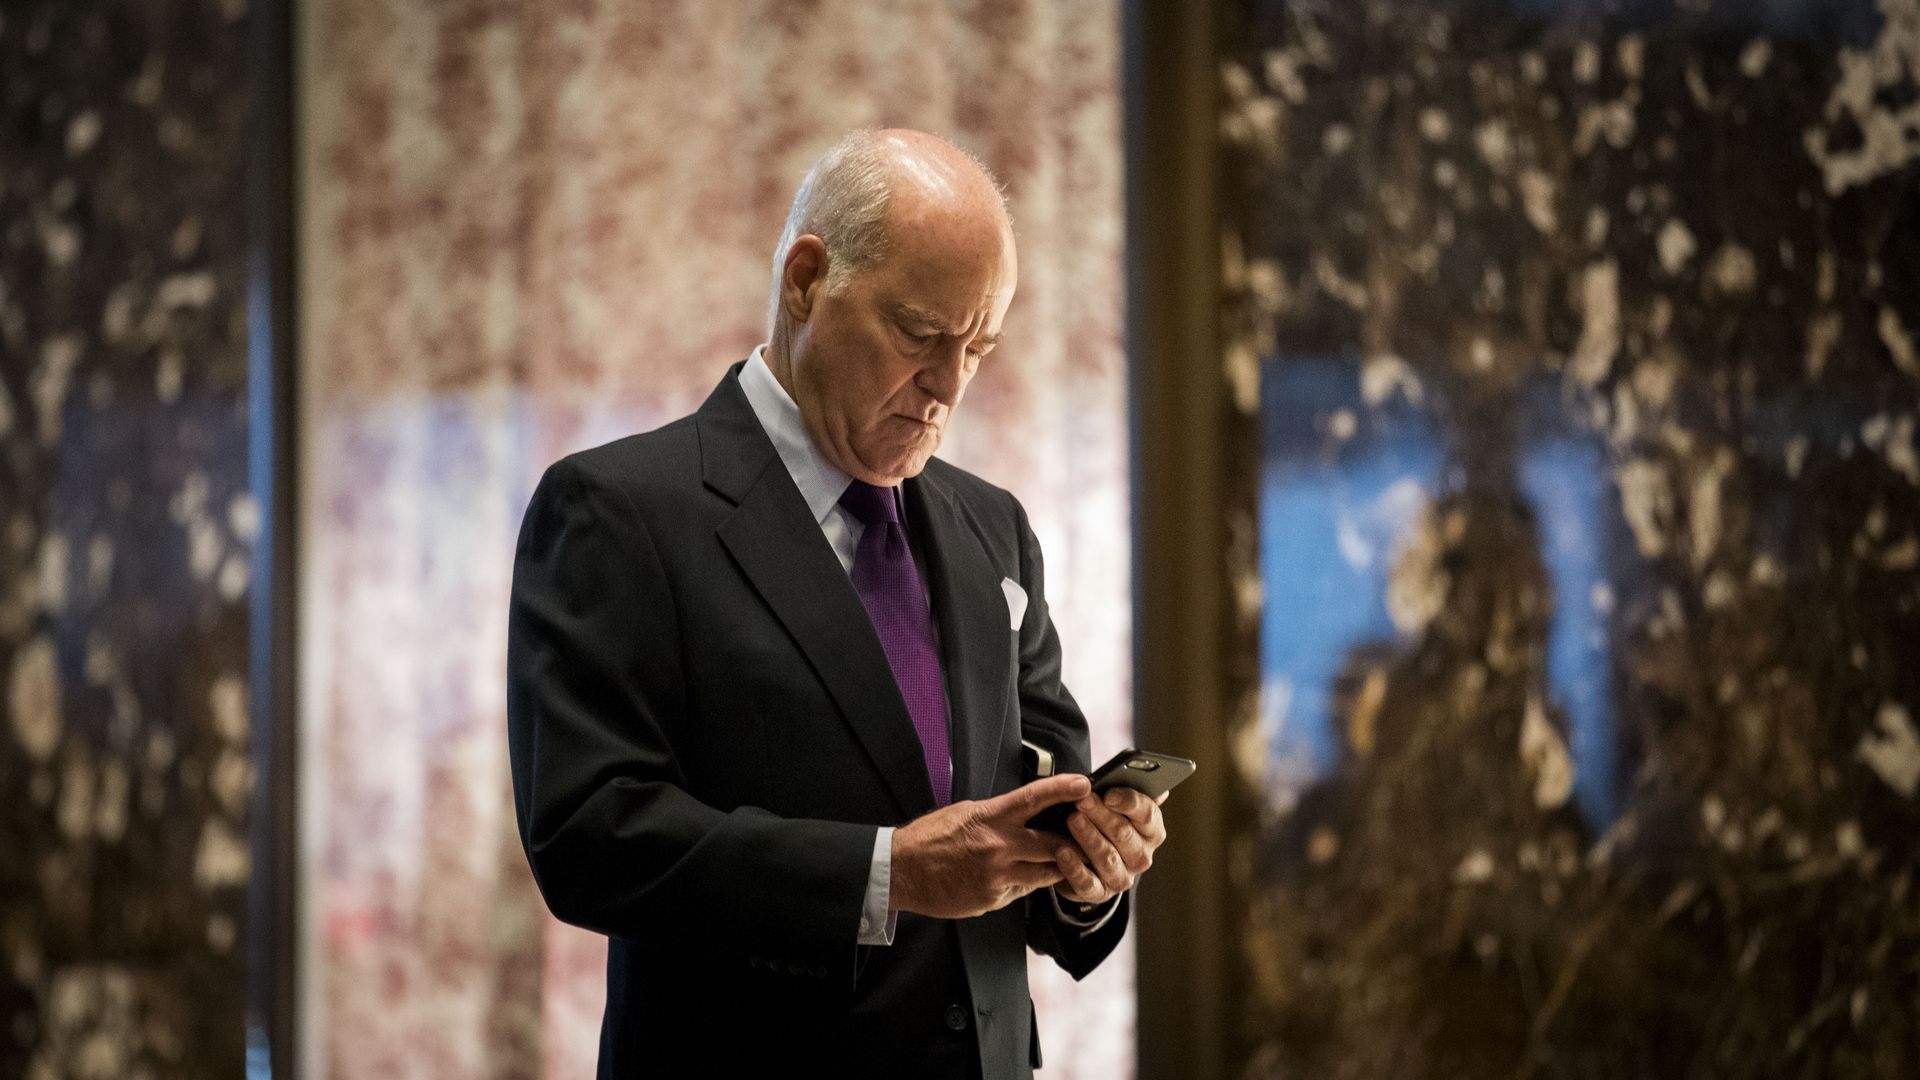 KKR co-founder Henry Kravis, looks at phone while at Trump Tower.